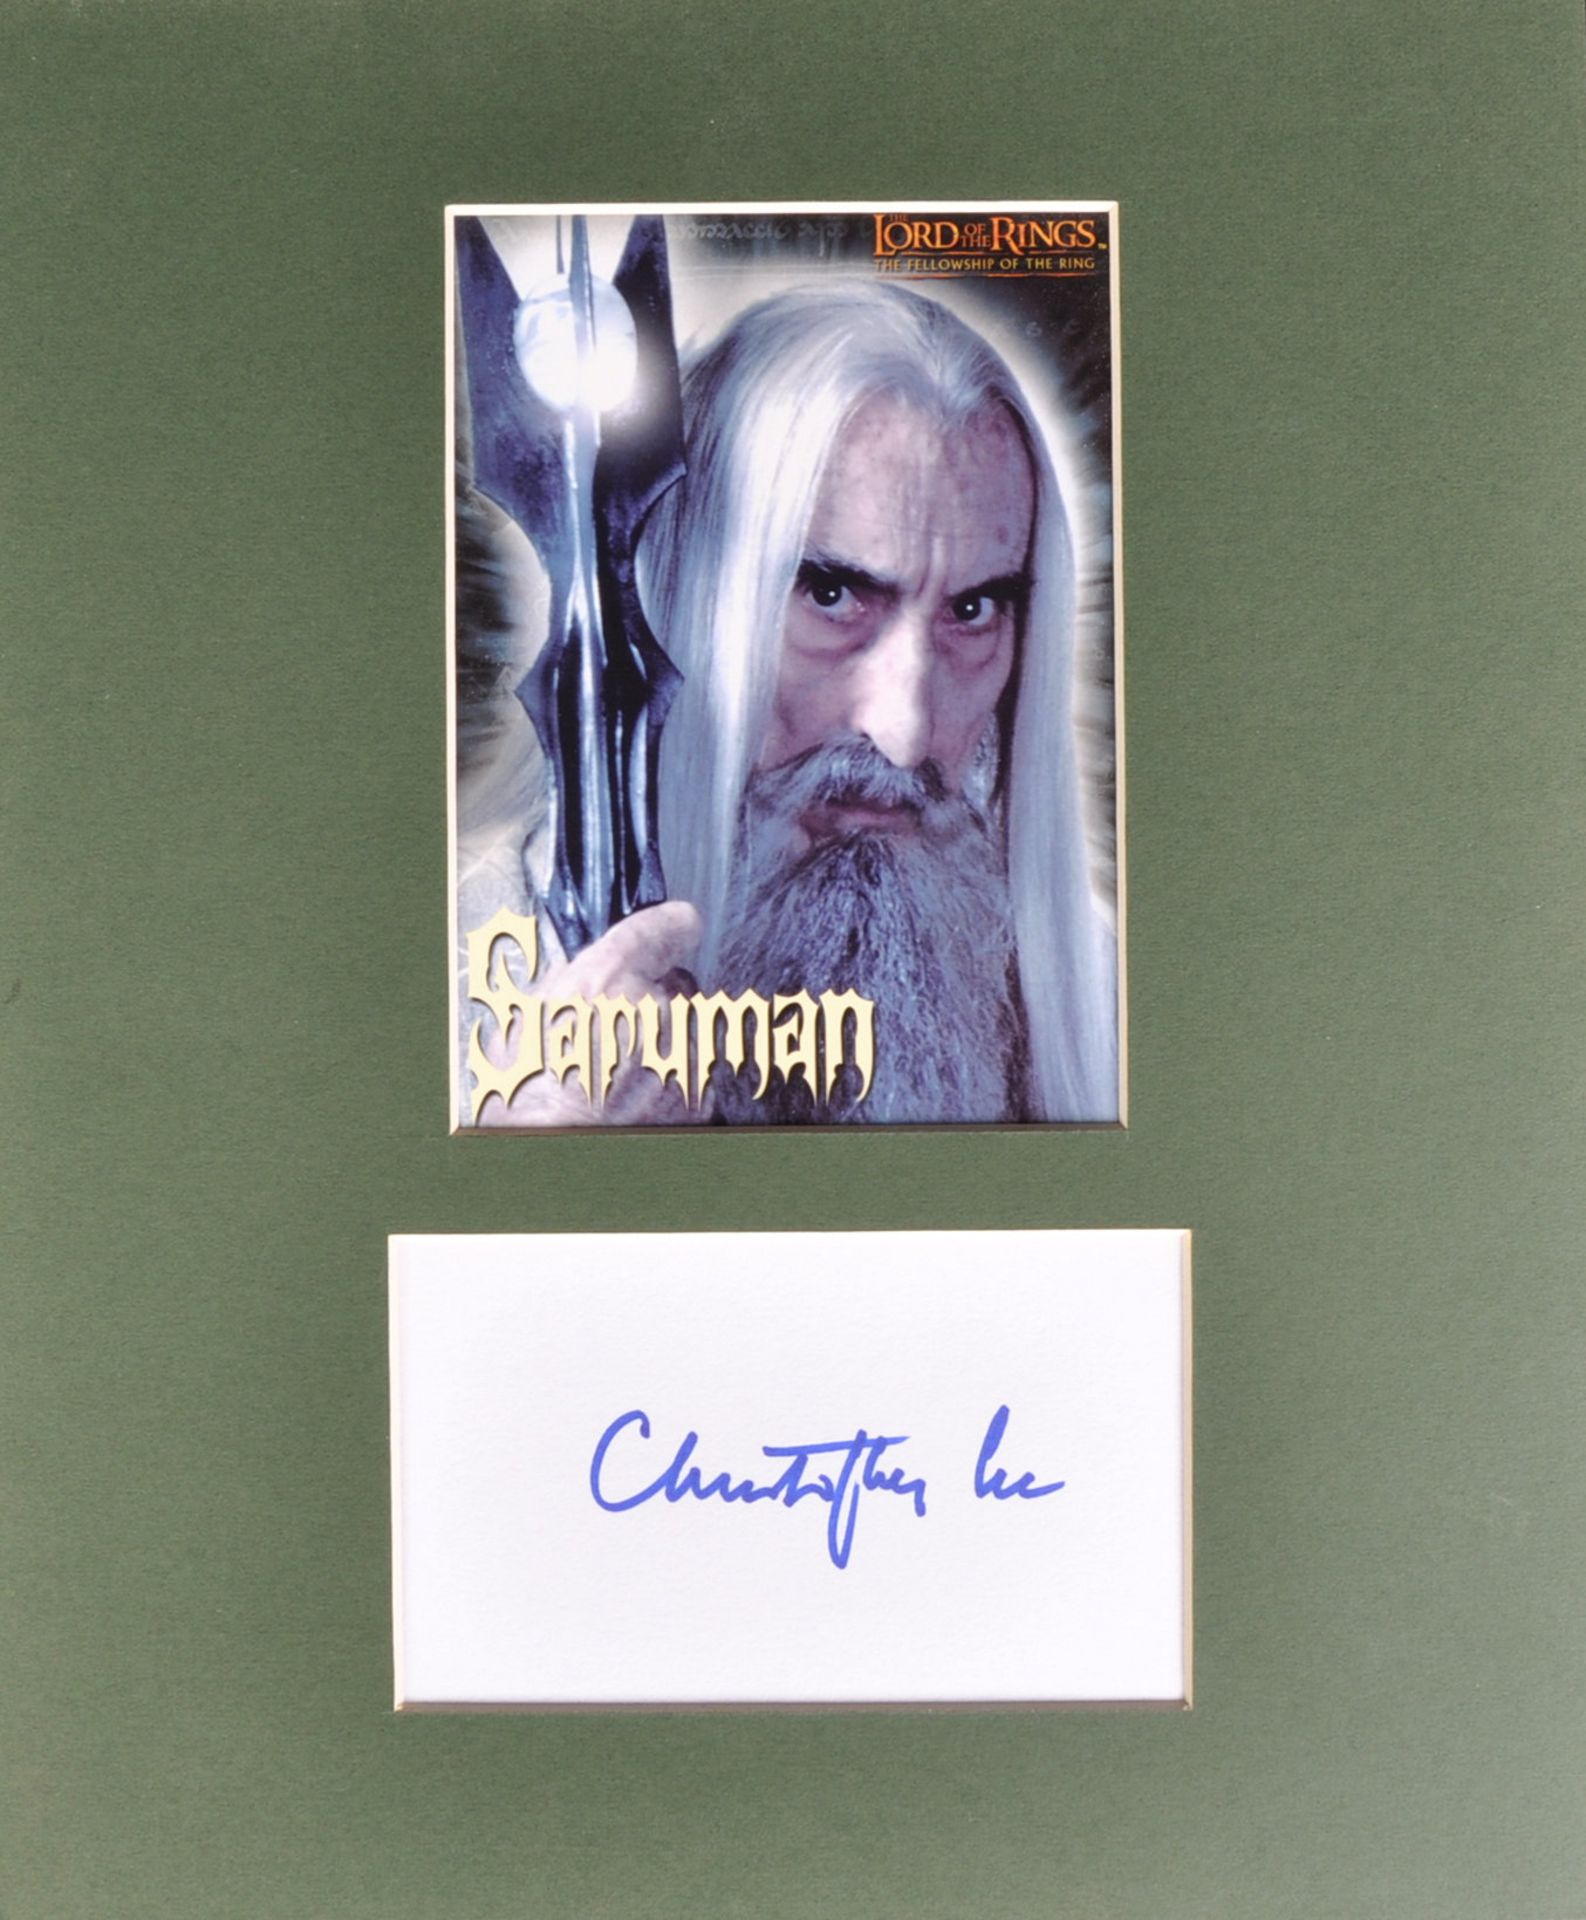 LORD OF THE RINGS - SIR CHRISTOPHER LEE - PRESENTATION AUTOGRAPH